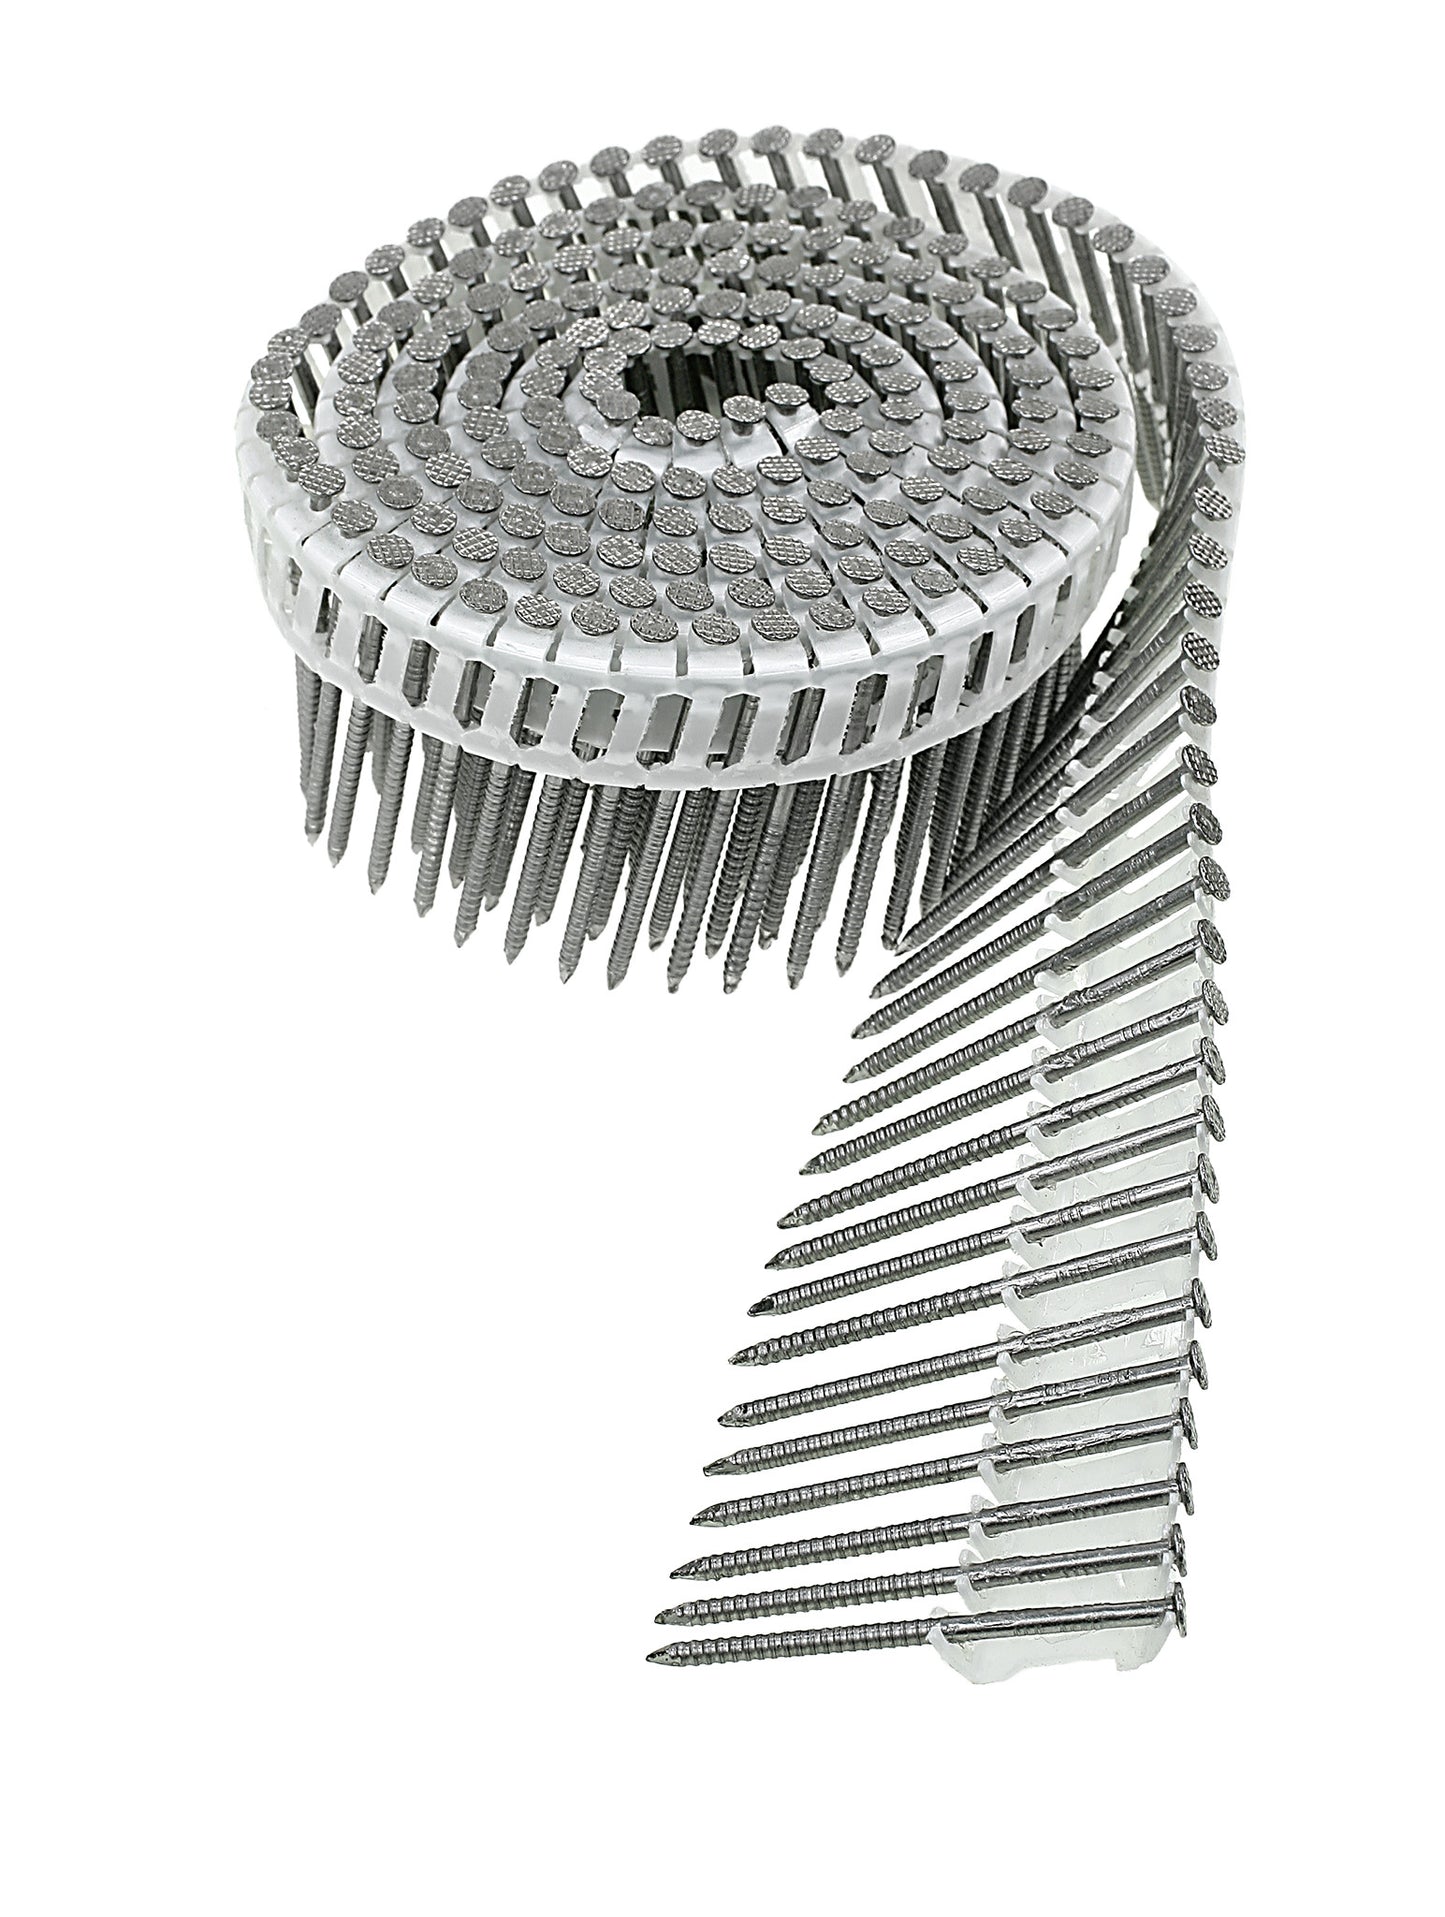 2 1/4" .099" 304 Stainless Steel 0 Degree Inserted Plastic Coil Nails